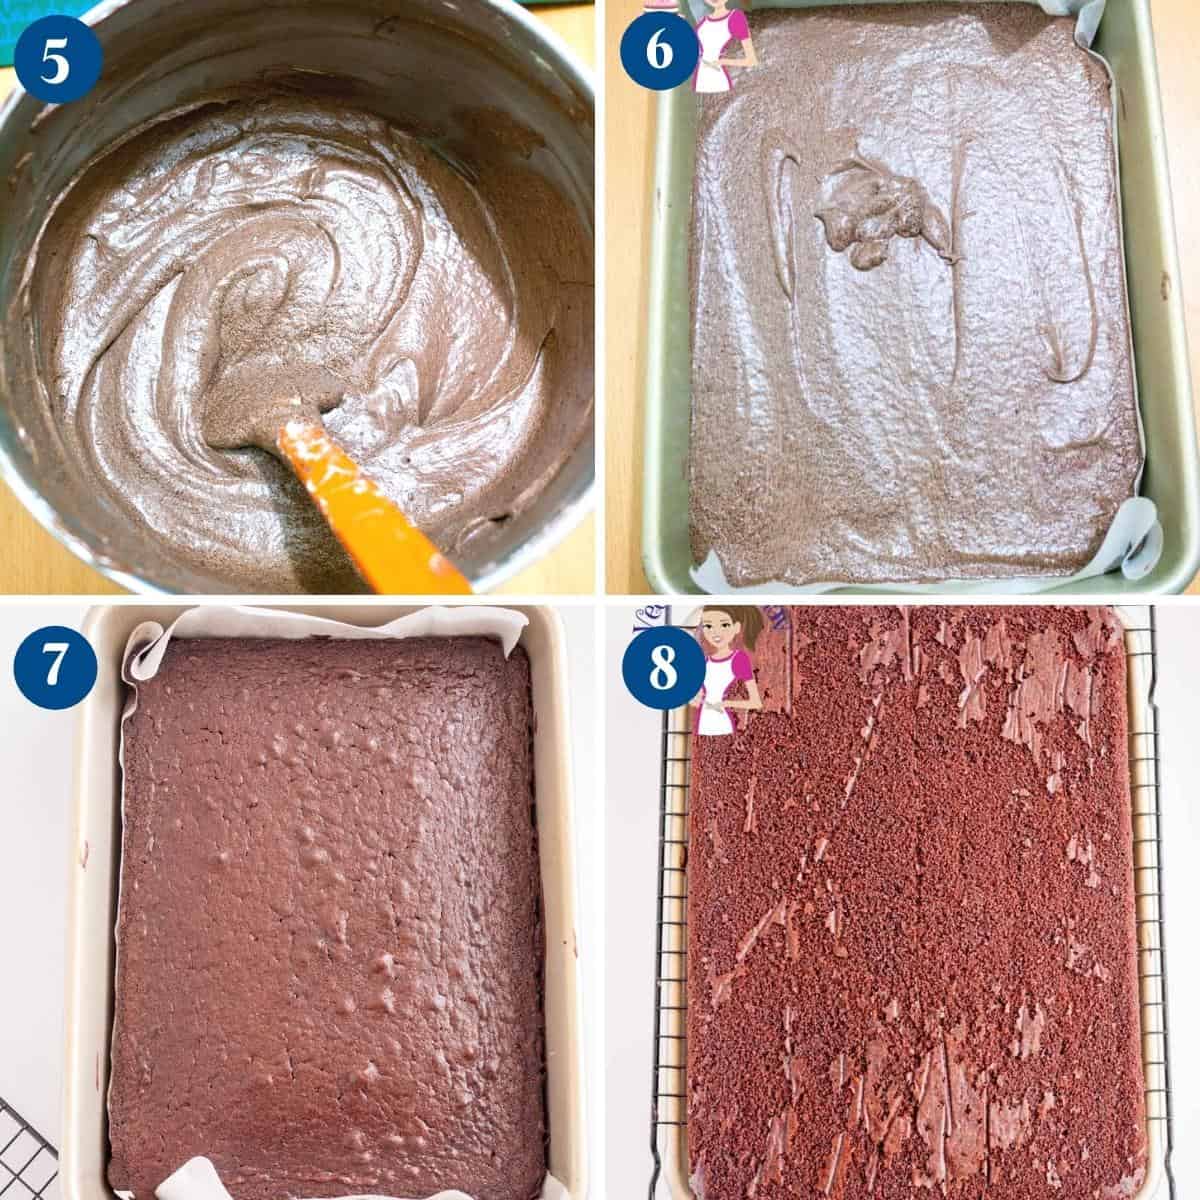 Progress pictures collage for chocolate carving cake.